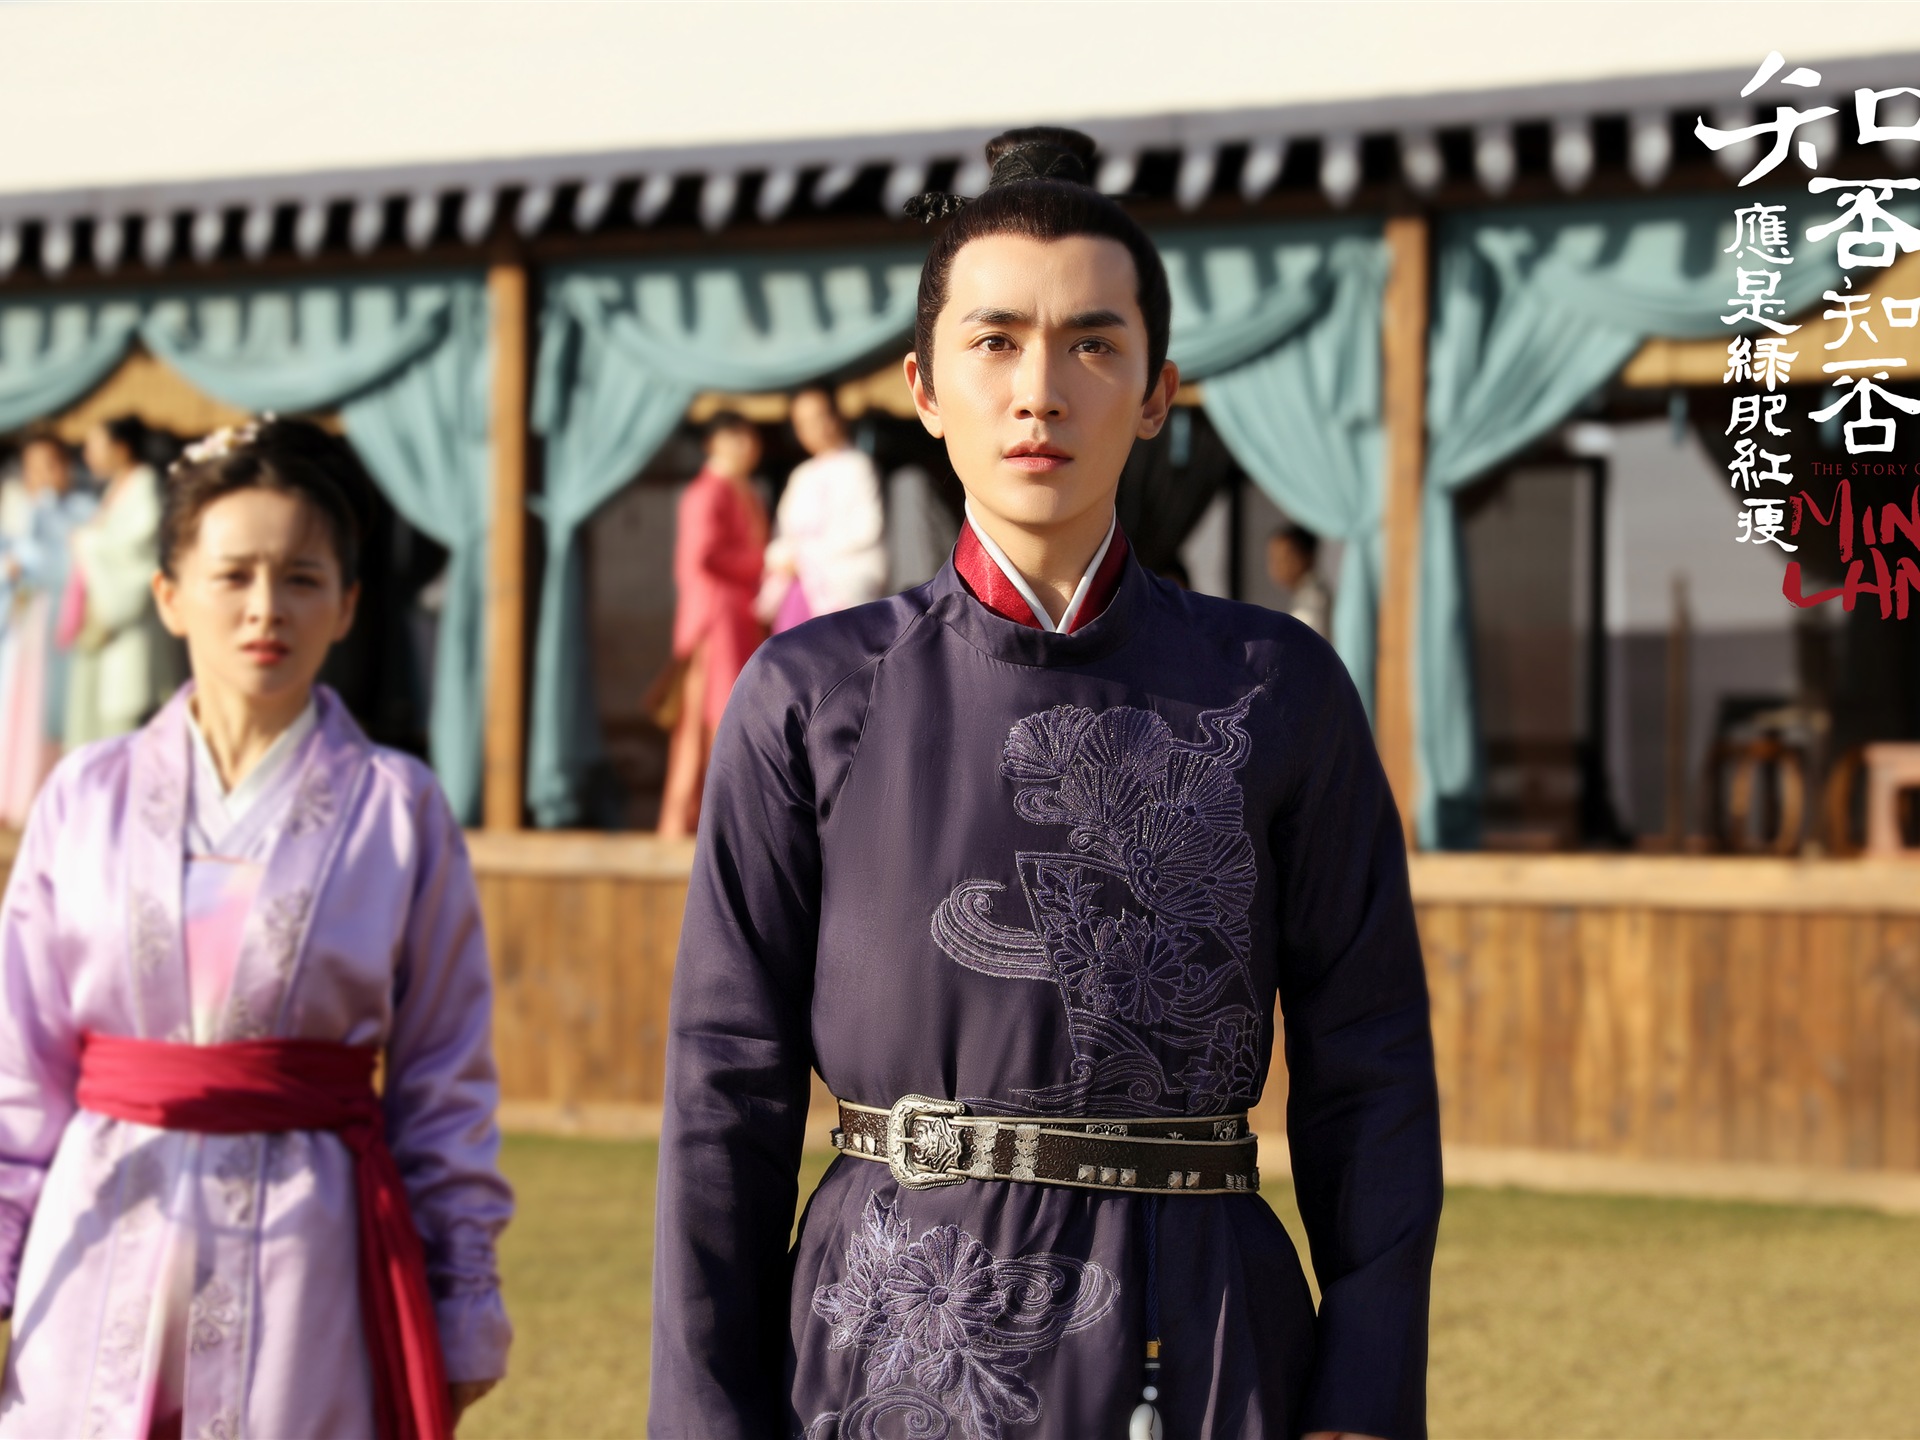 The Story Of MingLan, TV series HD wallpapers #38 - 1920x1440